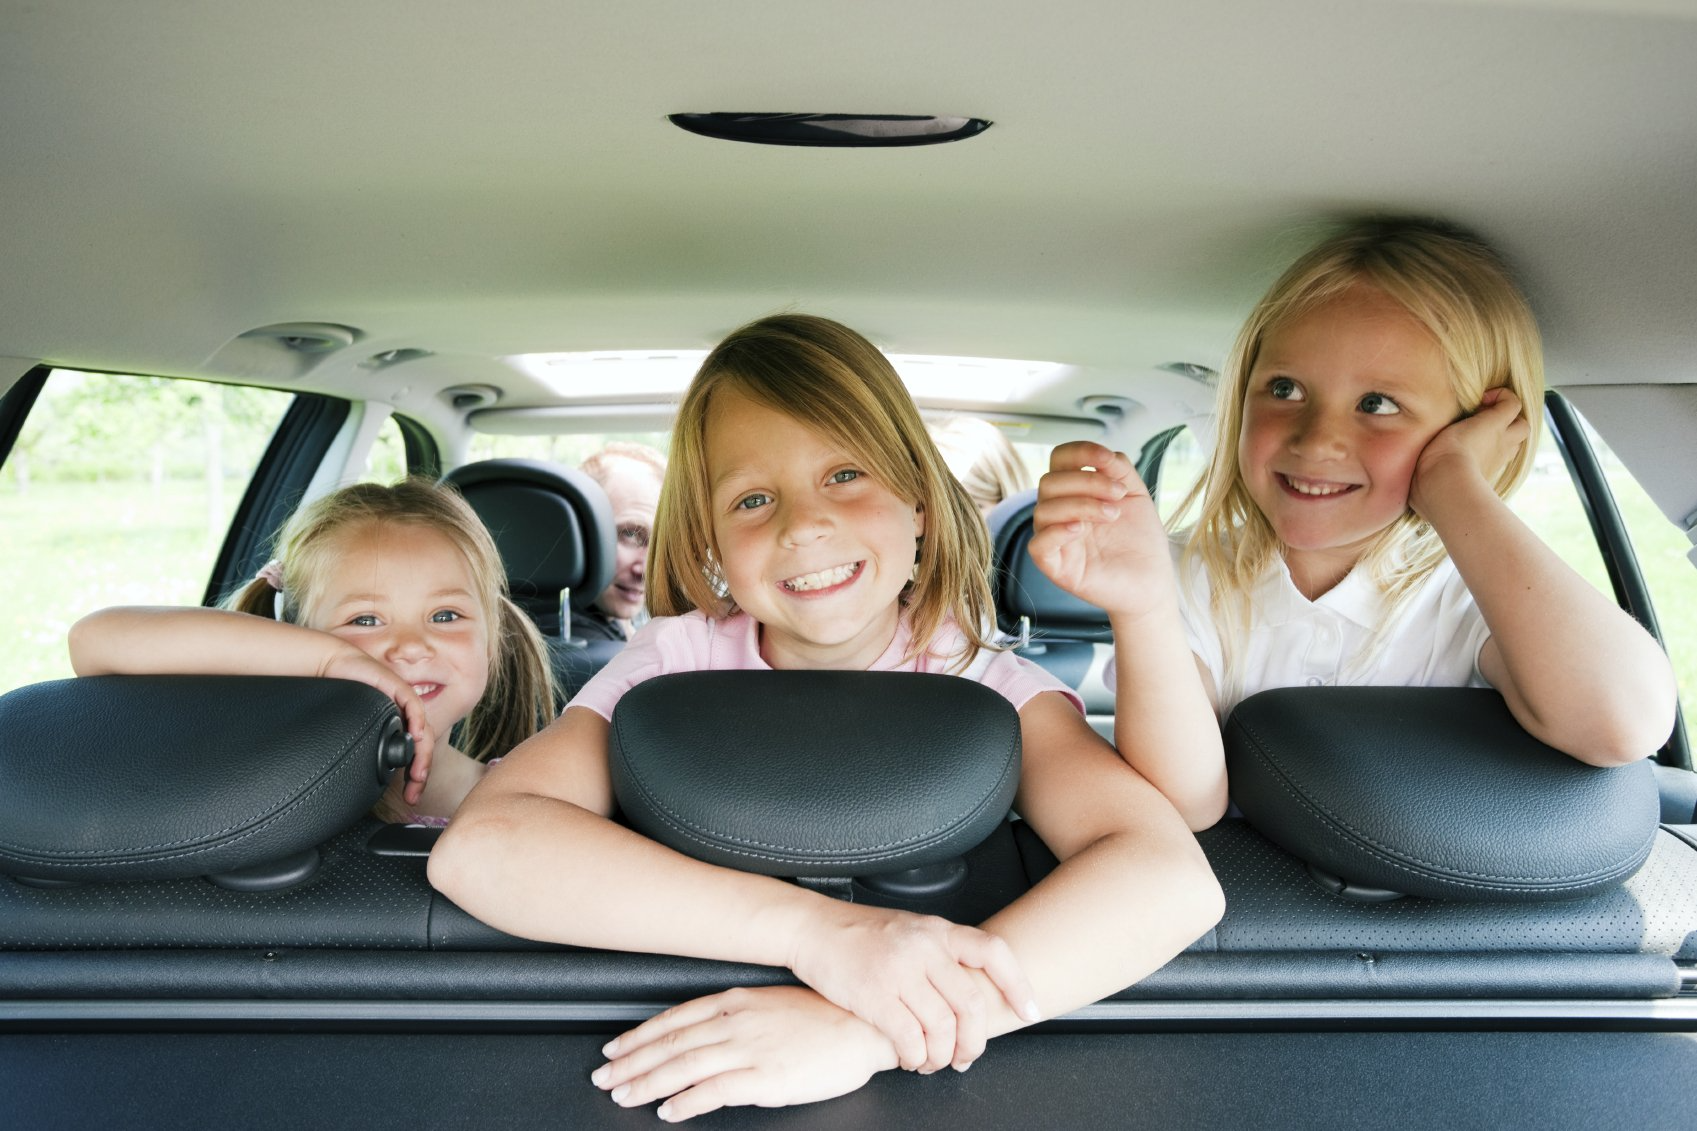 Transfers to Hotel Atolon with car baby seats